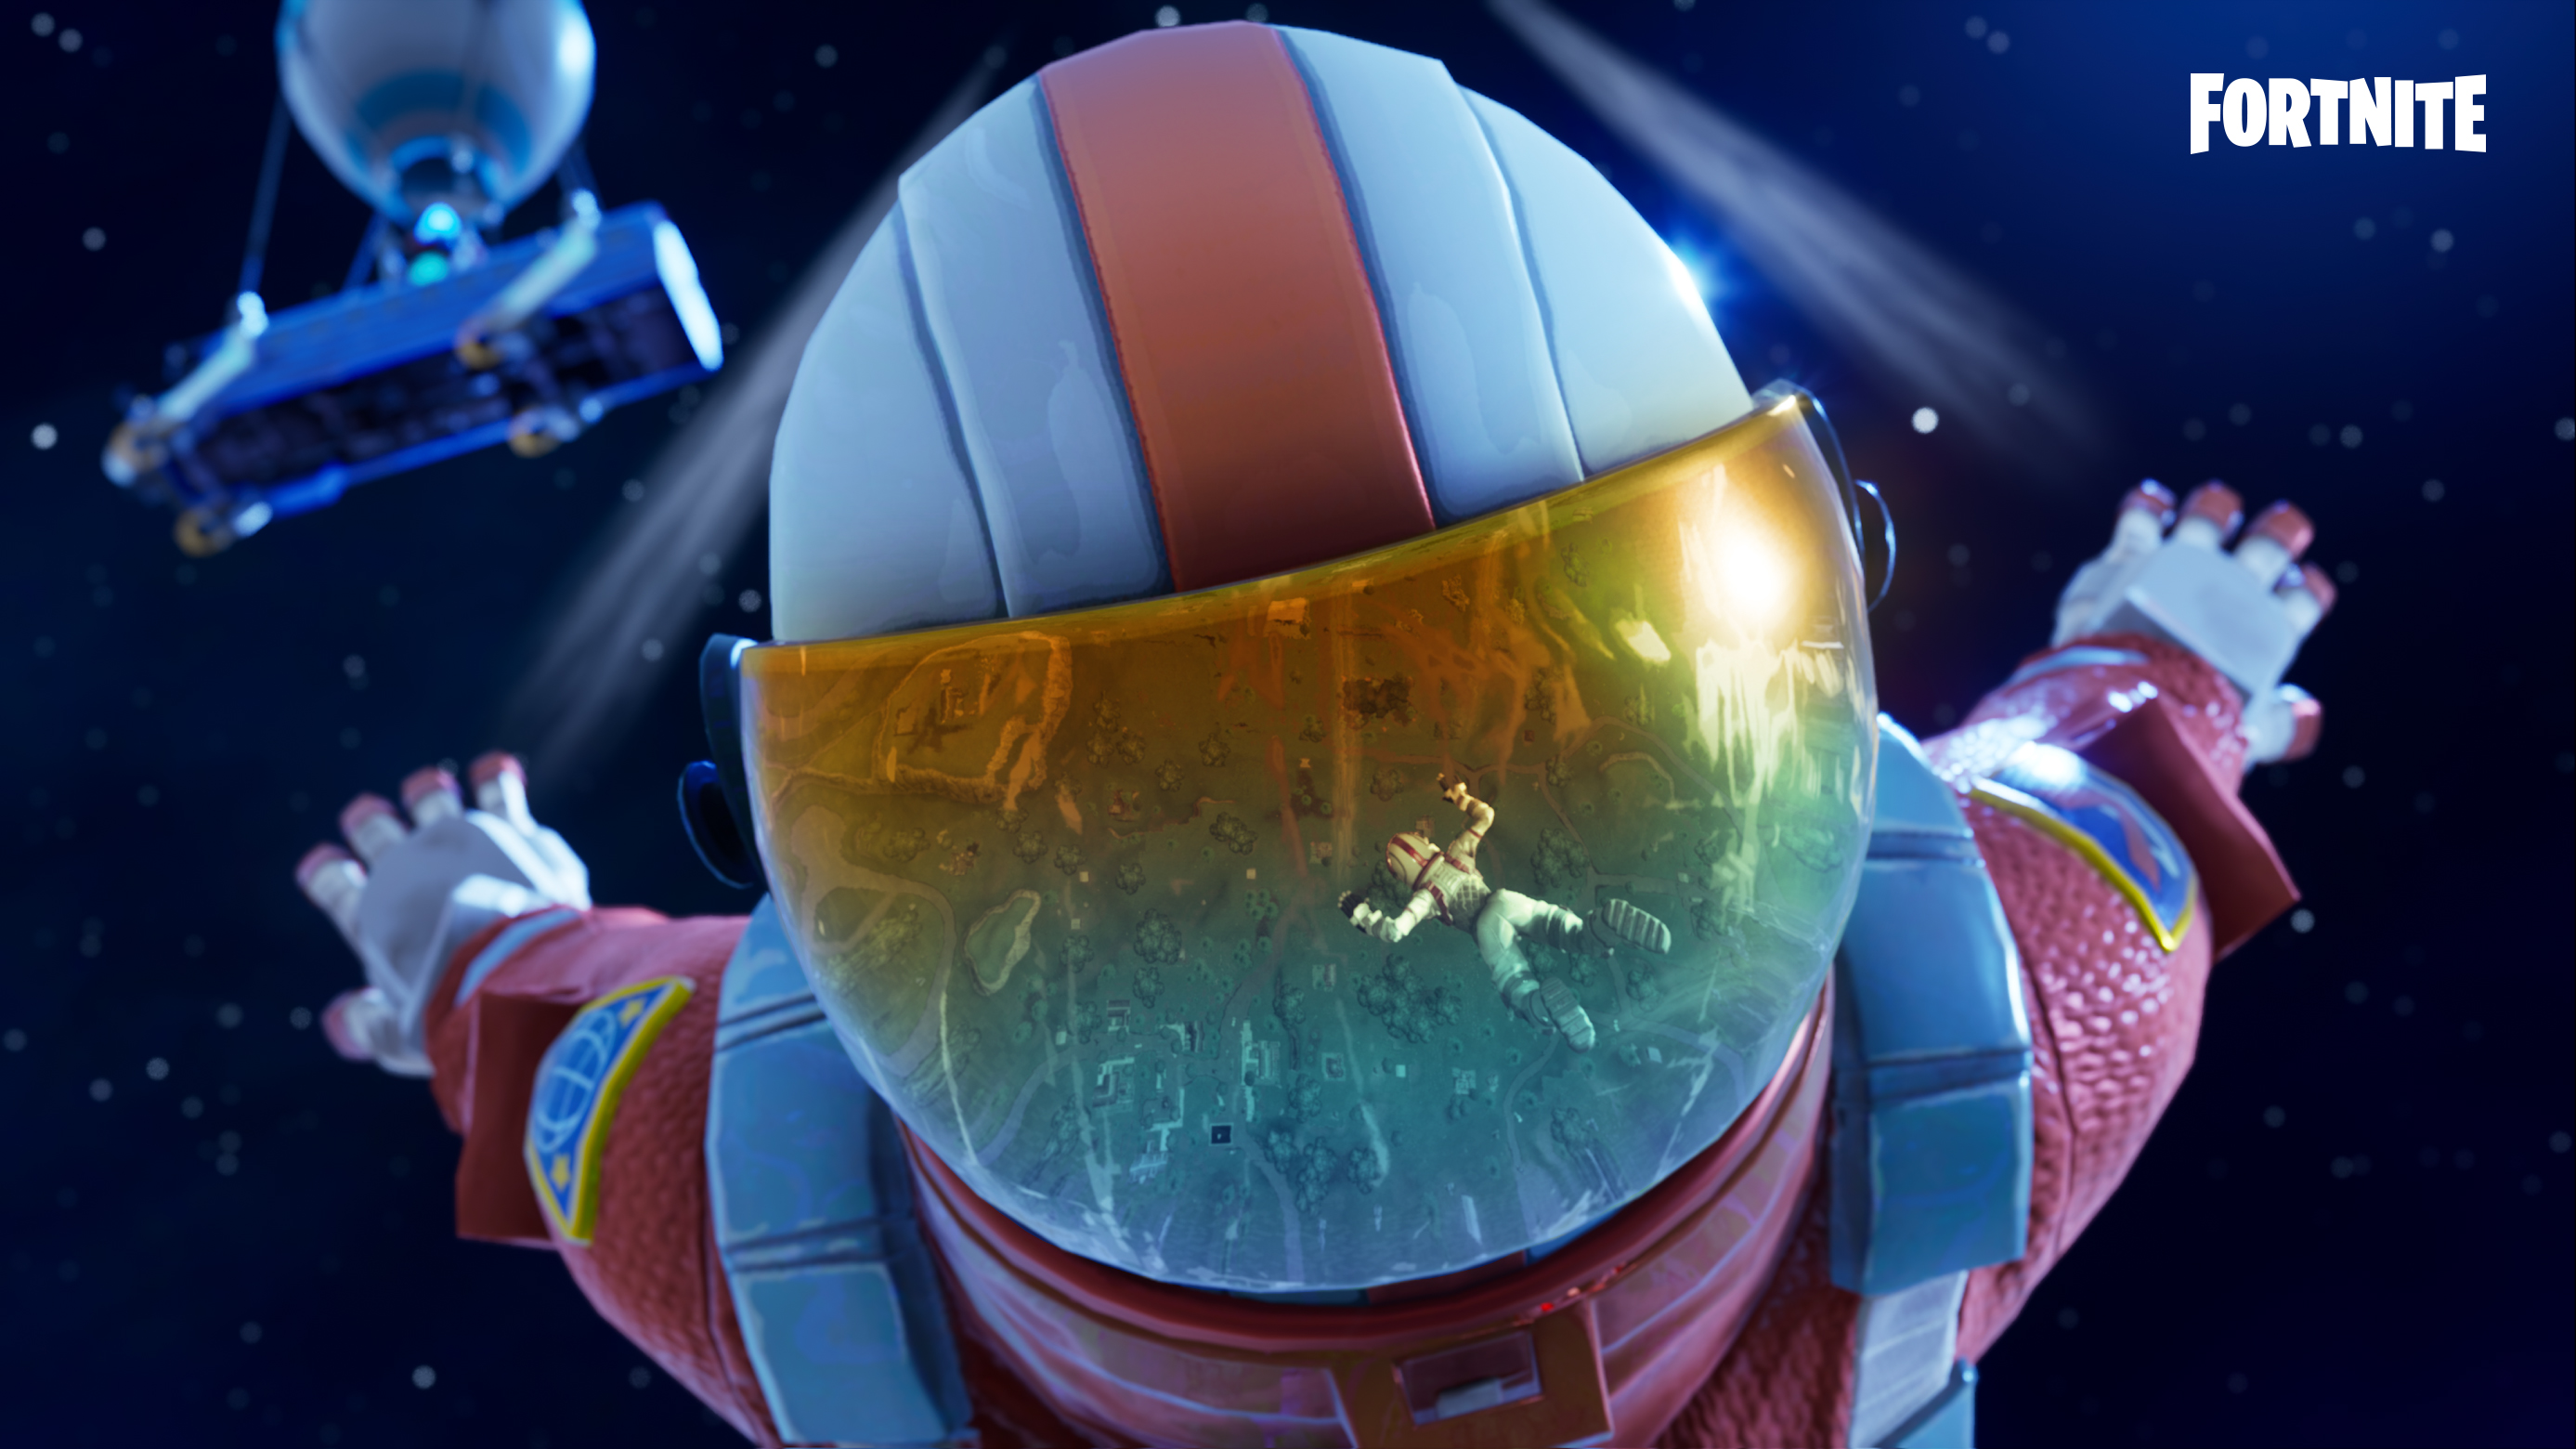 fortnite s free back bling is live now but just for this weekend - fortnite free back bling